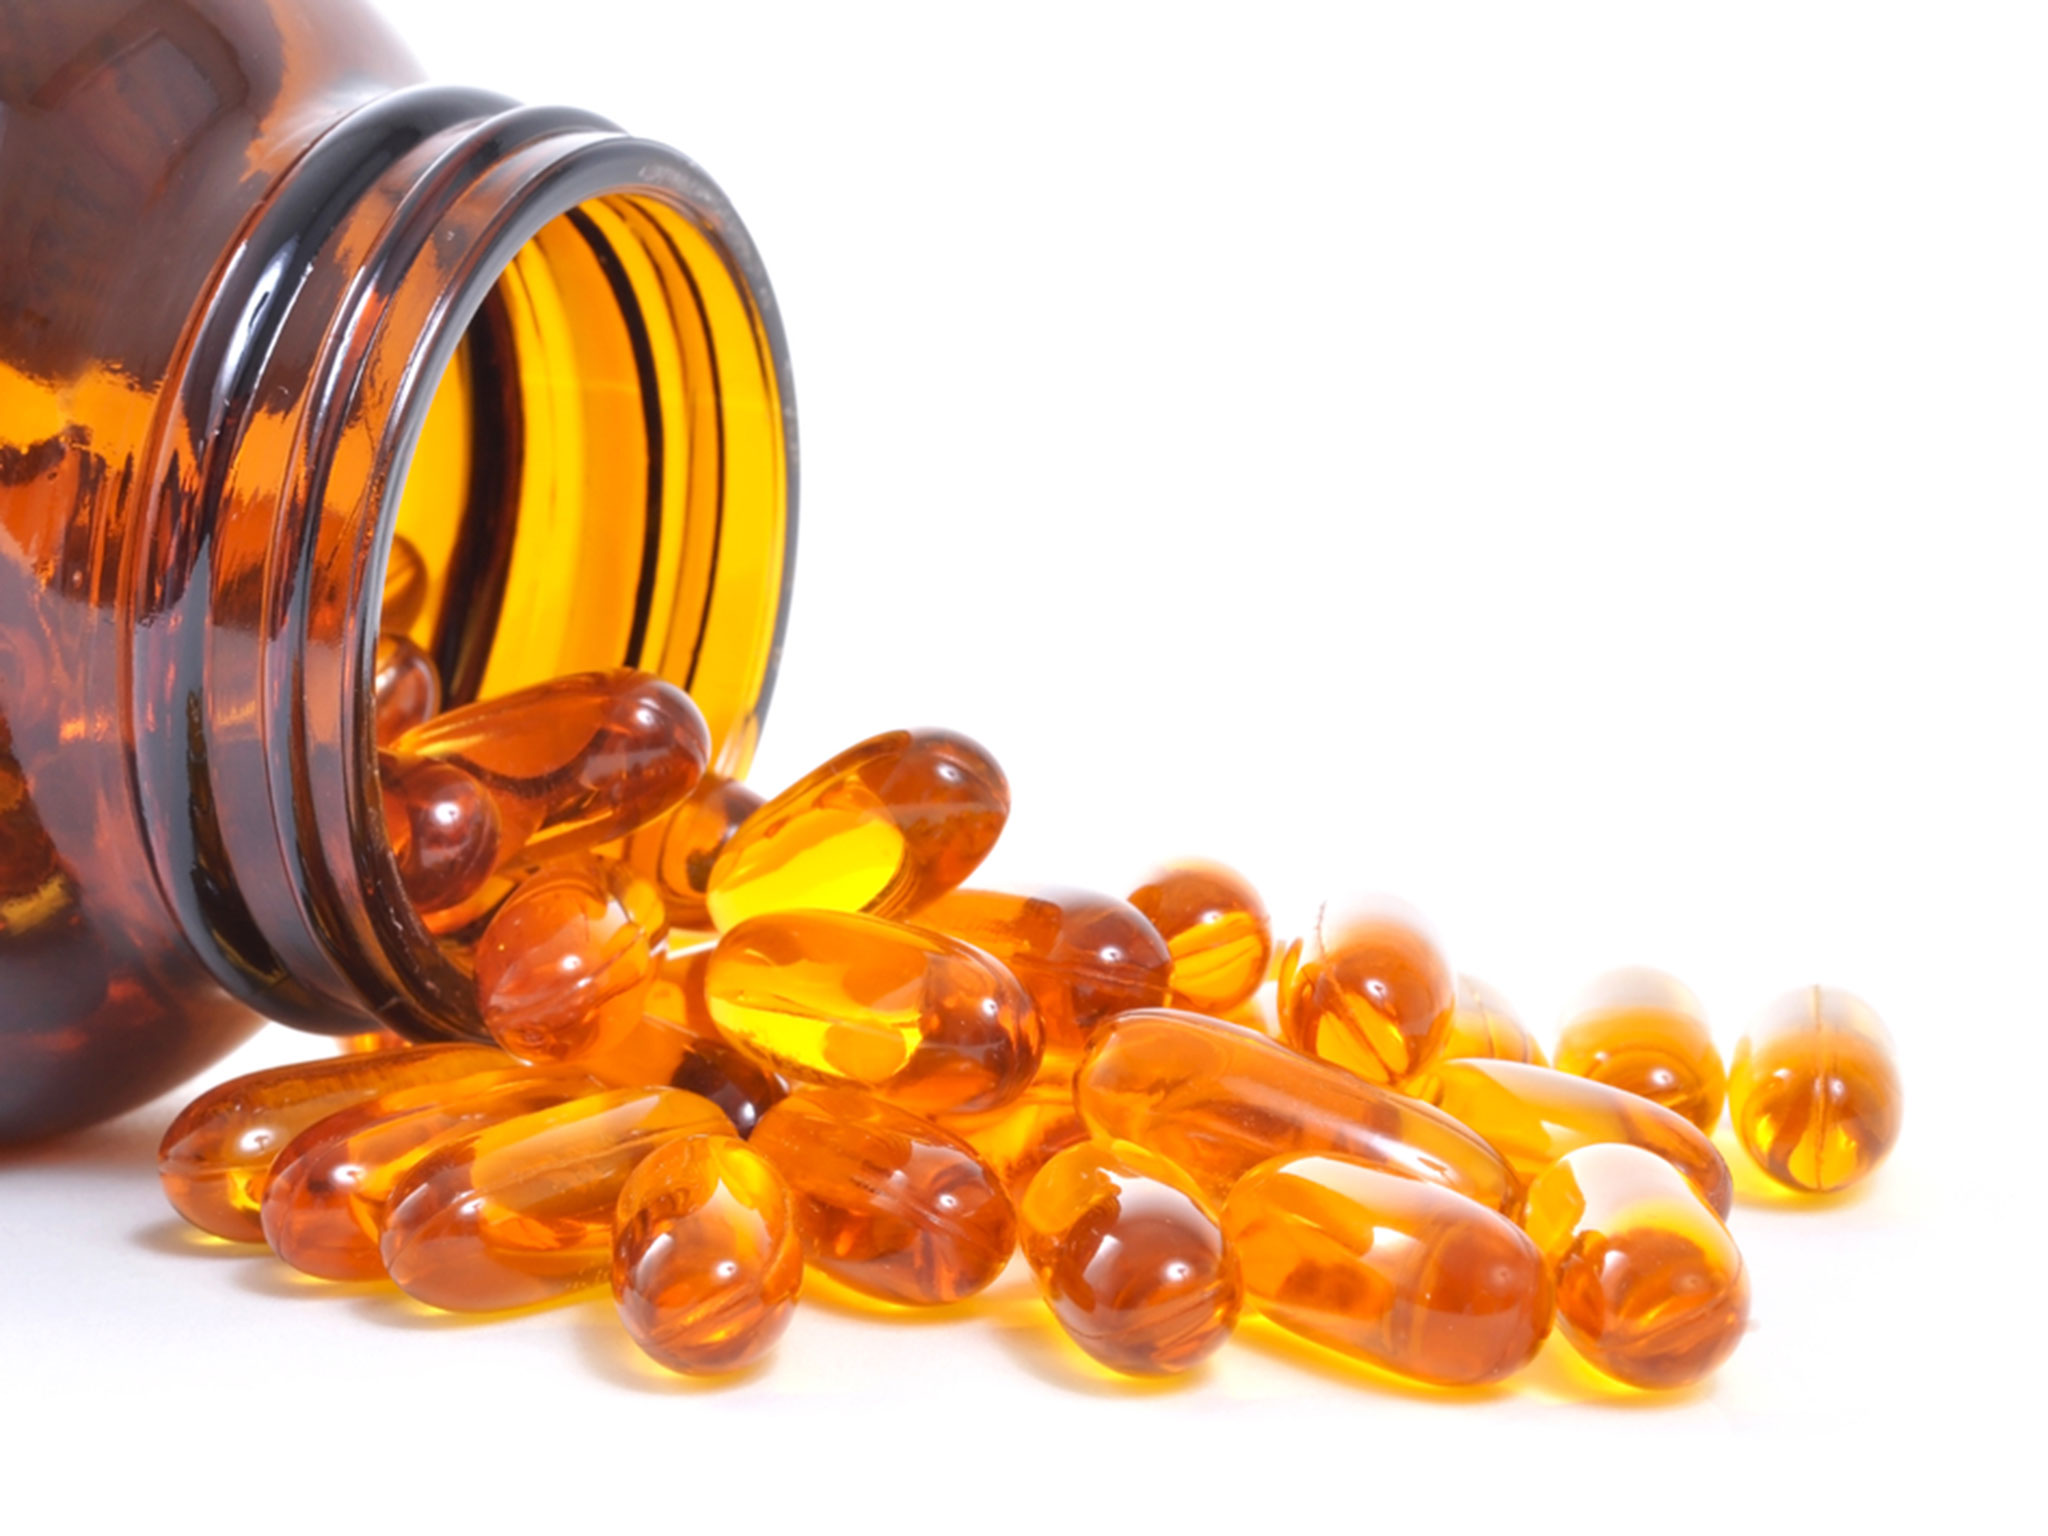 Overweight youngsters with a vitamin D deficiency at risk of heart disease as they grow older